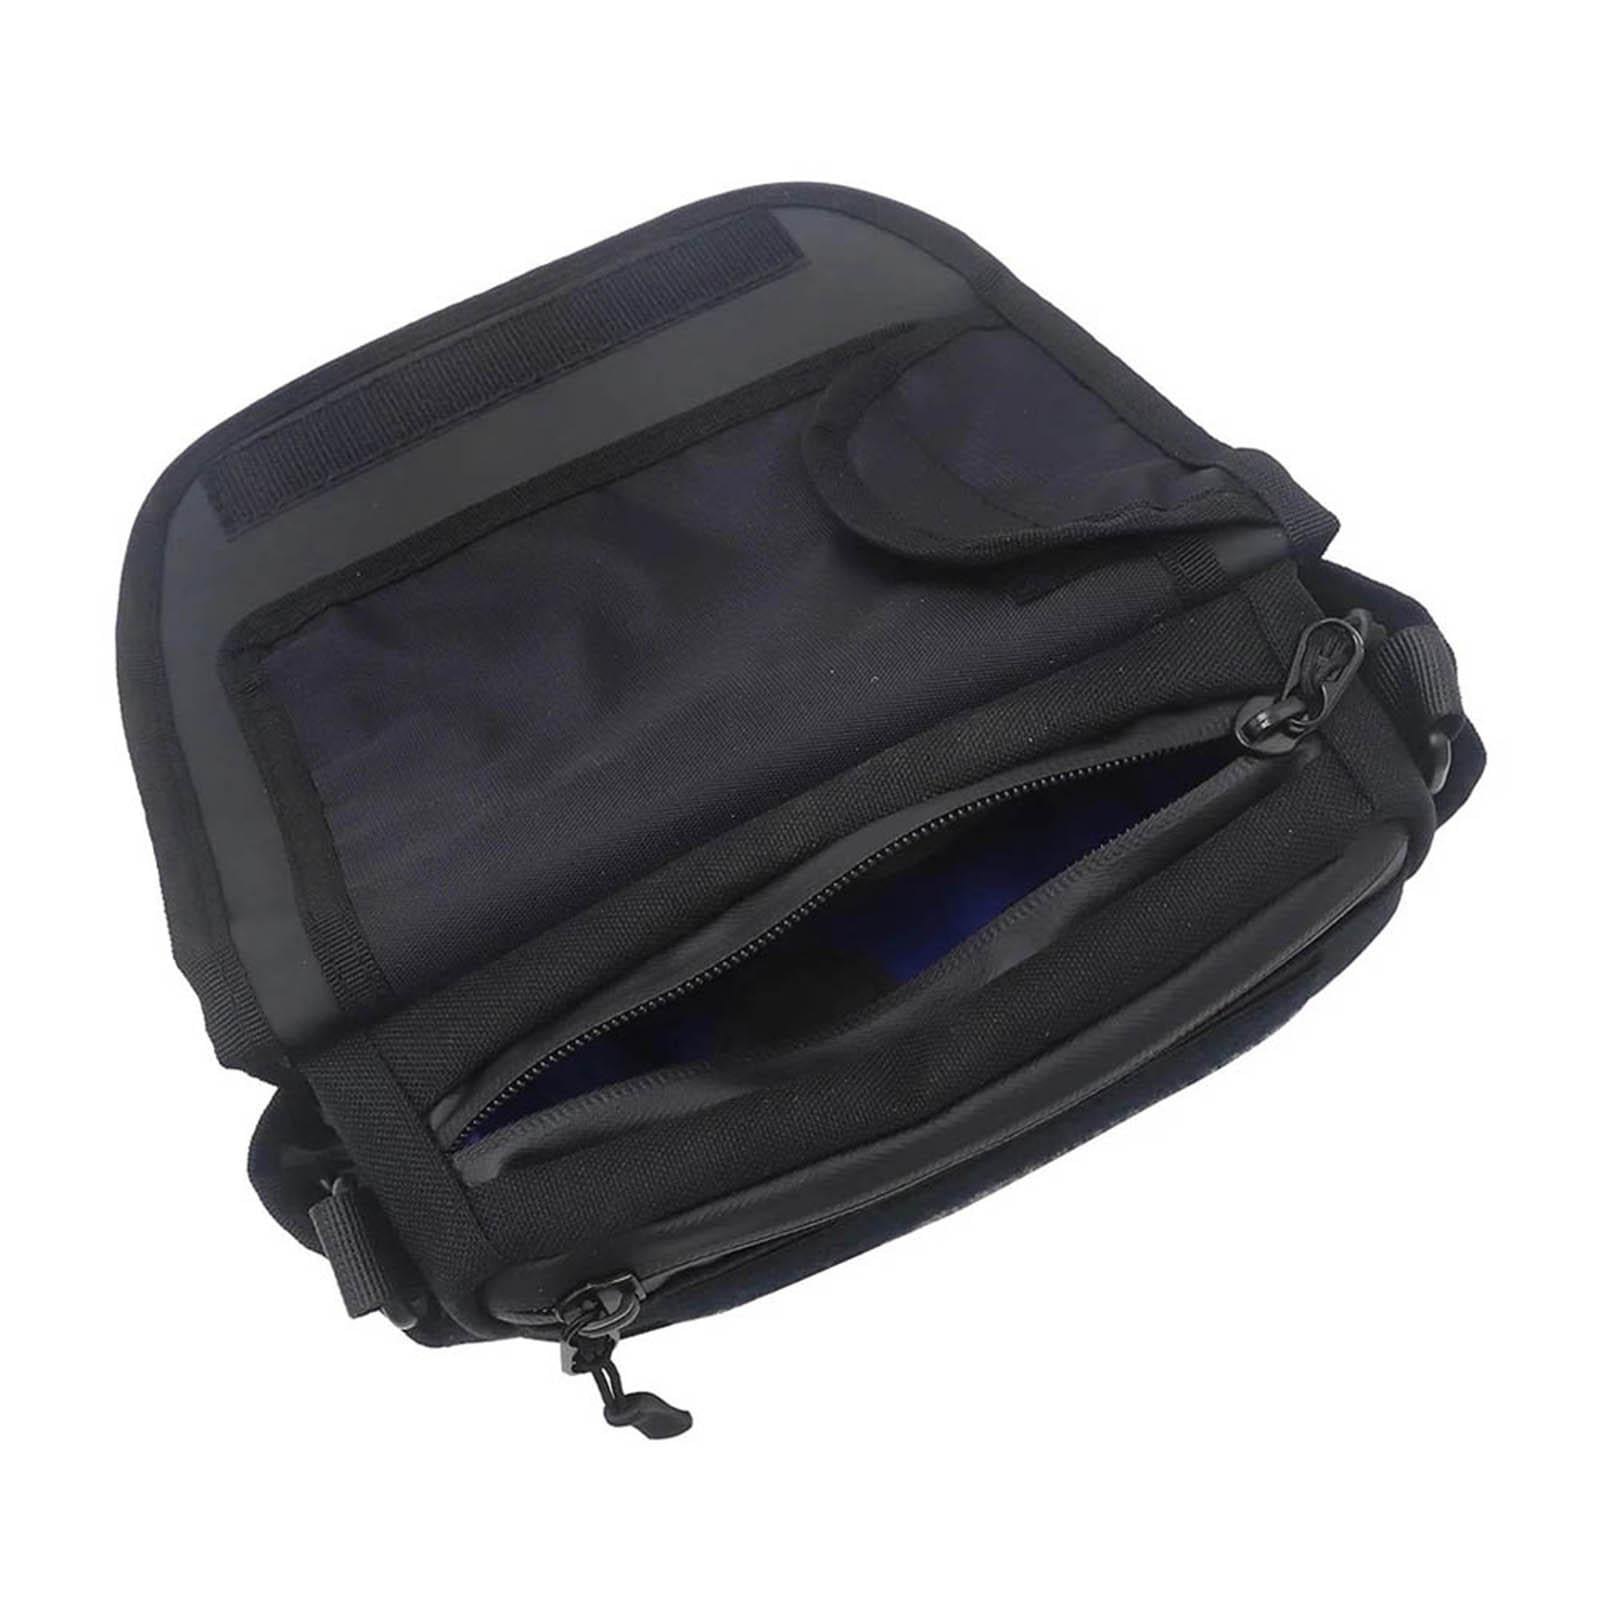 Color : R1200RT Associated Press Cockpit Bag Fit For BMW R1200RT LC R1250RT Motorcycle Handlebar Bag Storage Package R1200RT R1250RT Waterproof Bag Travel Bag 